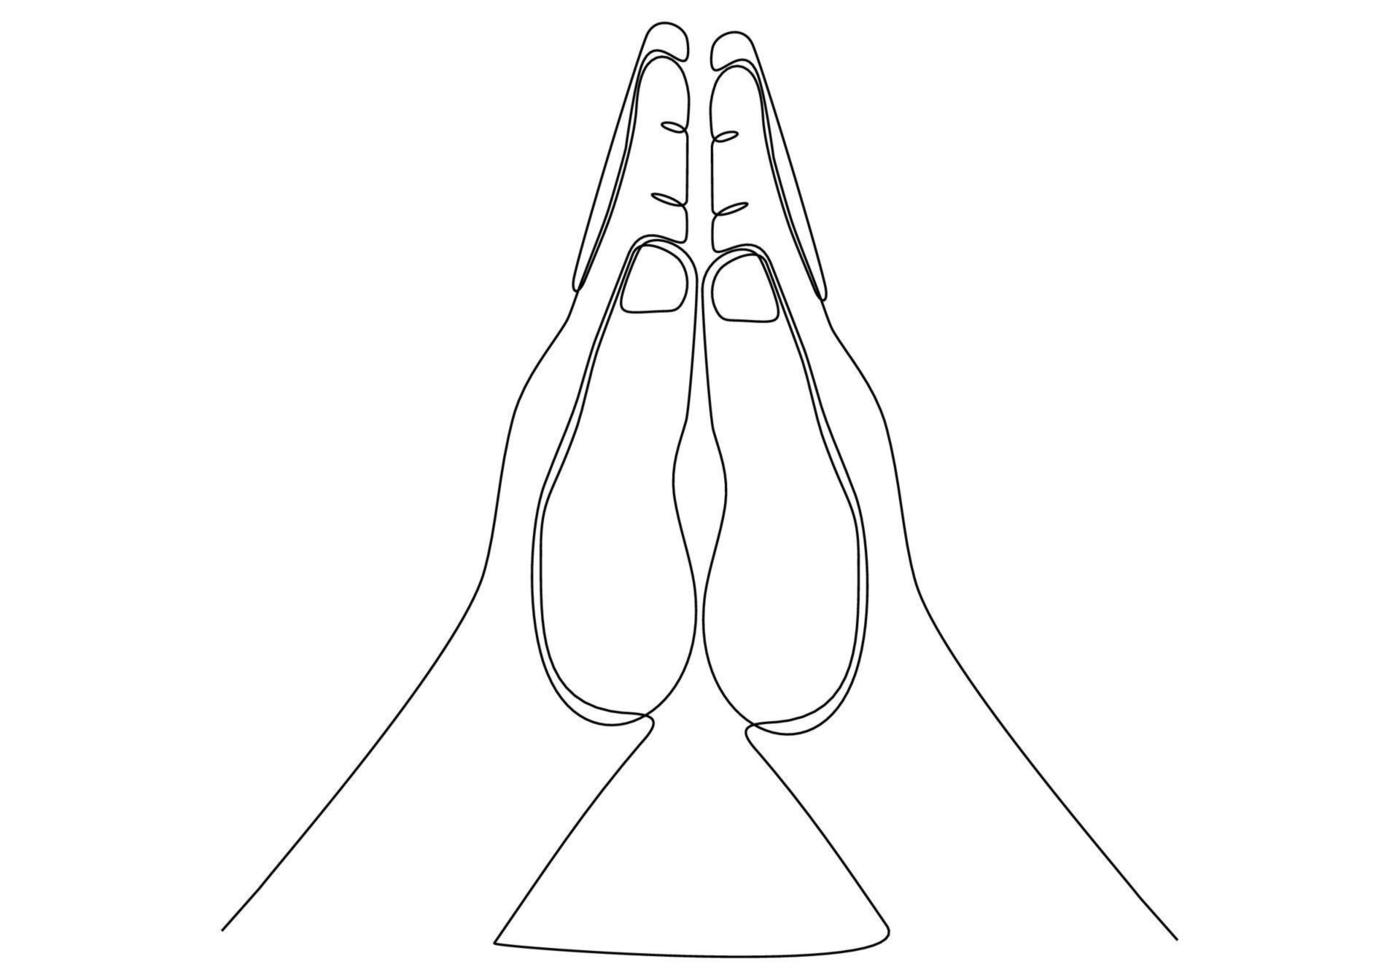 continuous line drawing of prayer hand. Hands palms together. Vector illustrations.